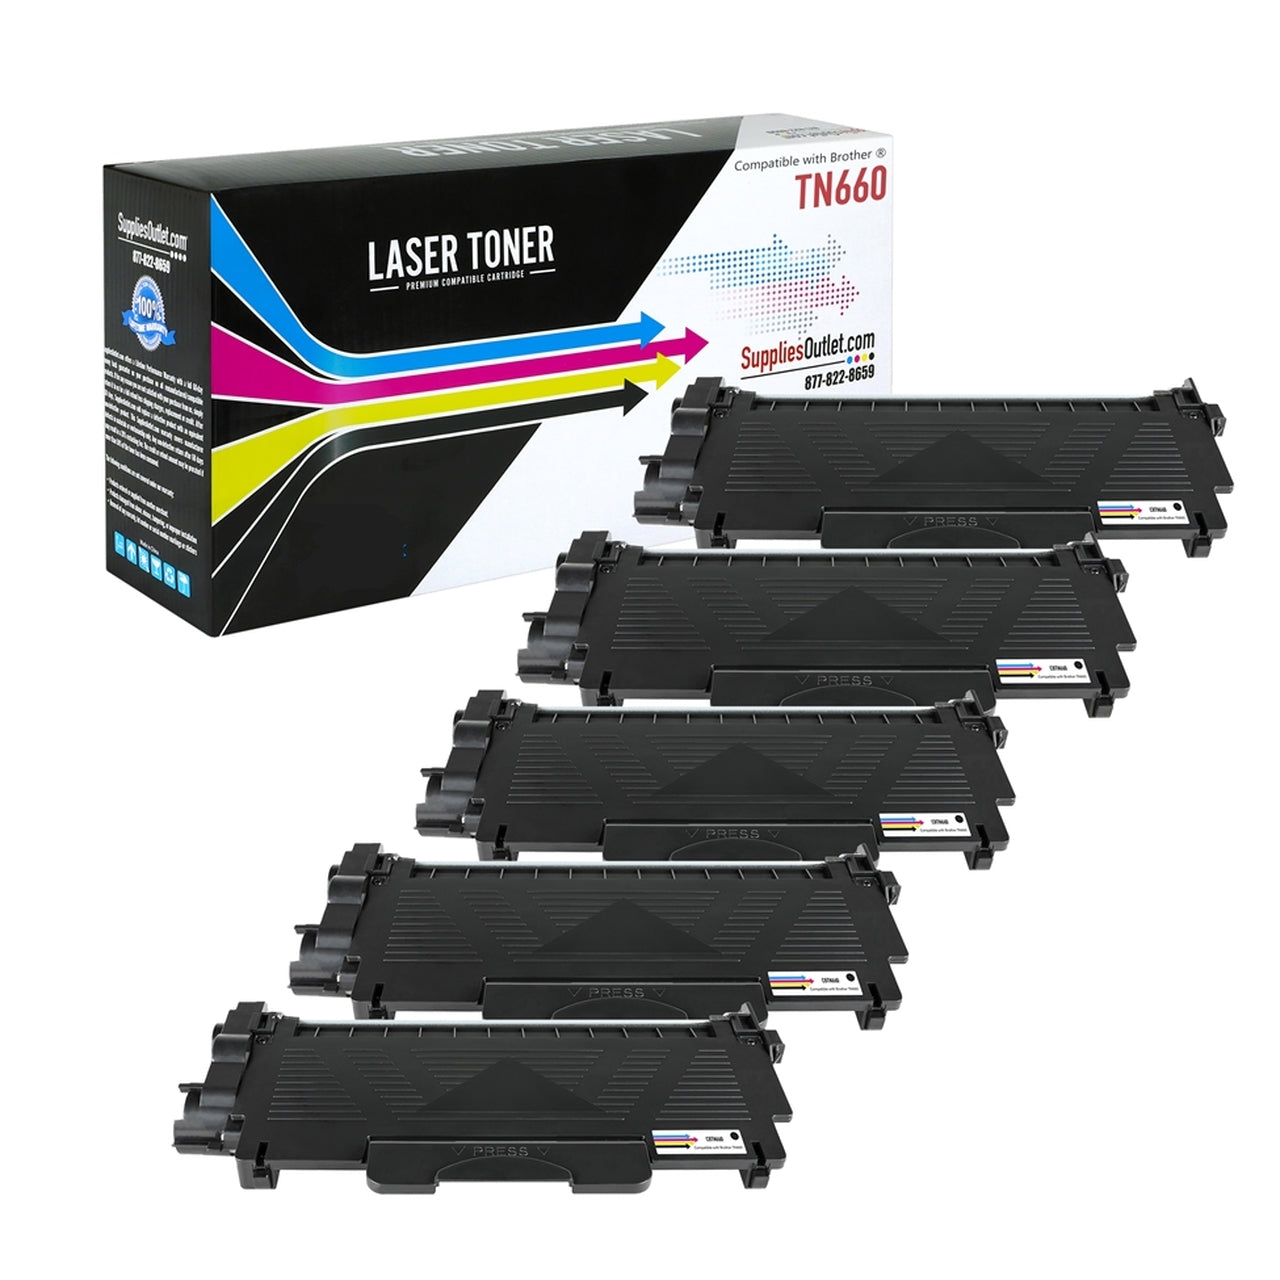 Compatible Brother TN-660 Black High Yield Toner Cartridge - 2600 Page Yield